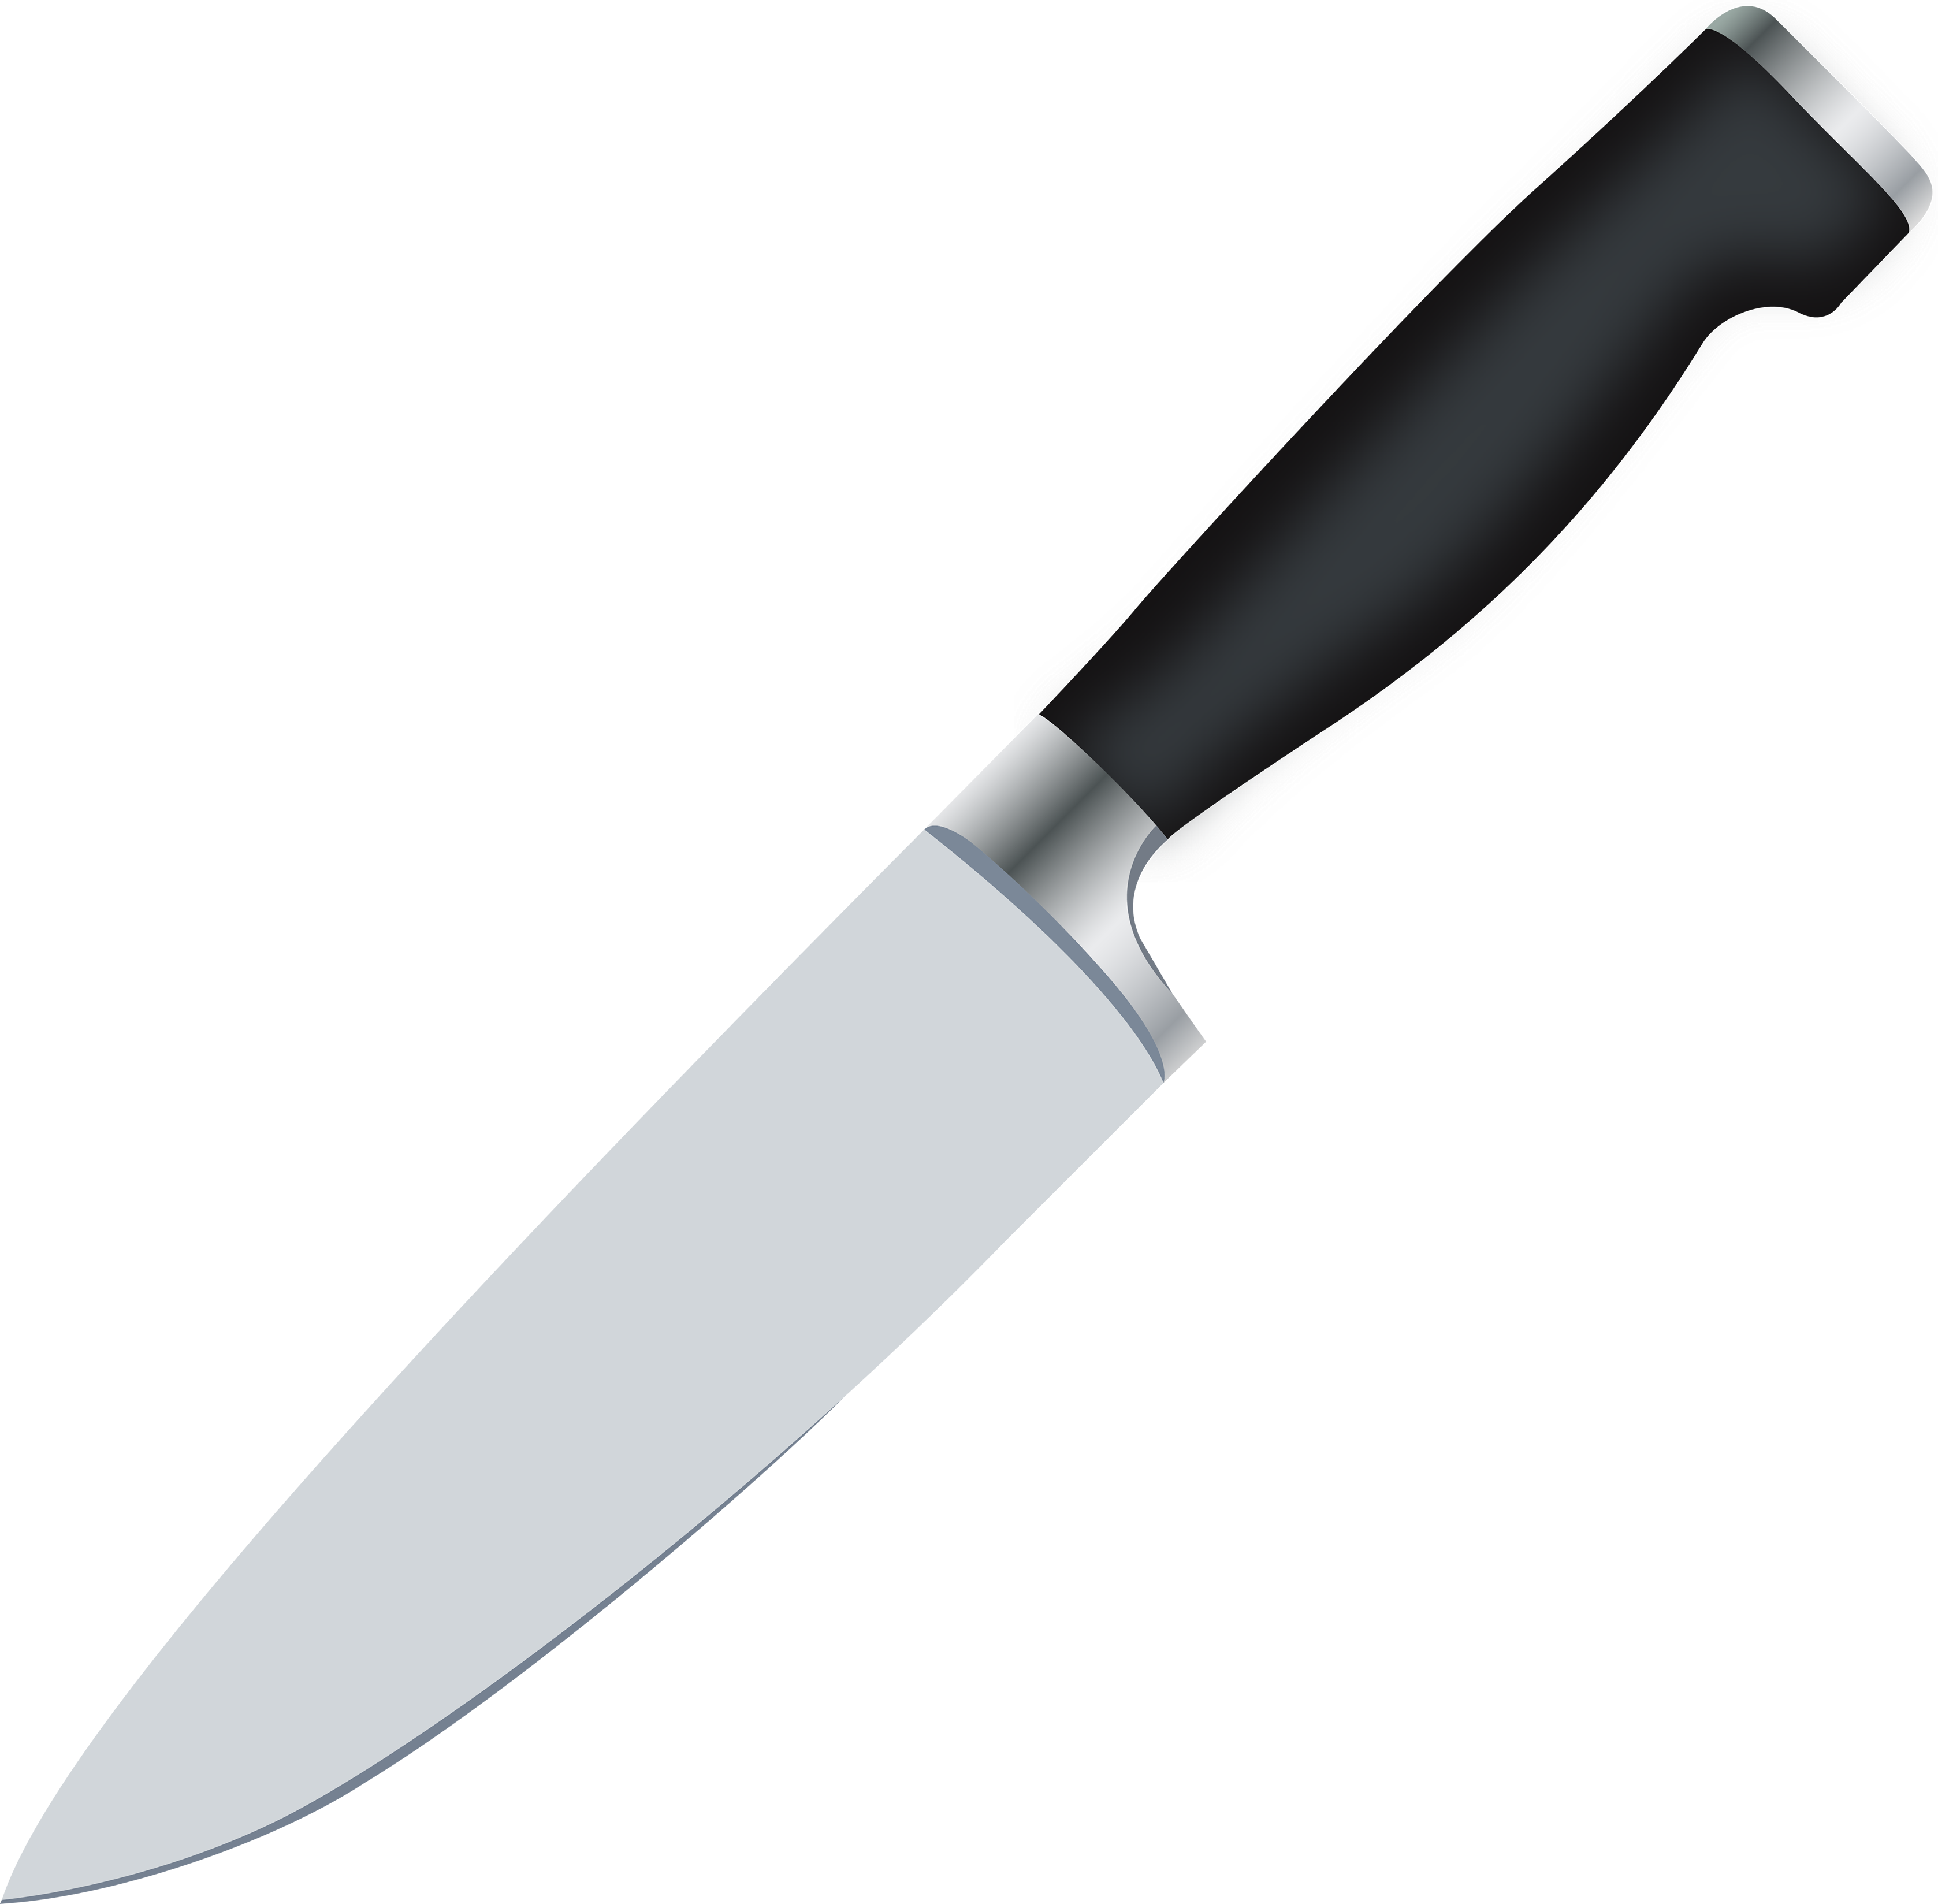 Knife clipart #3, Download drawings